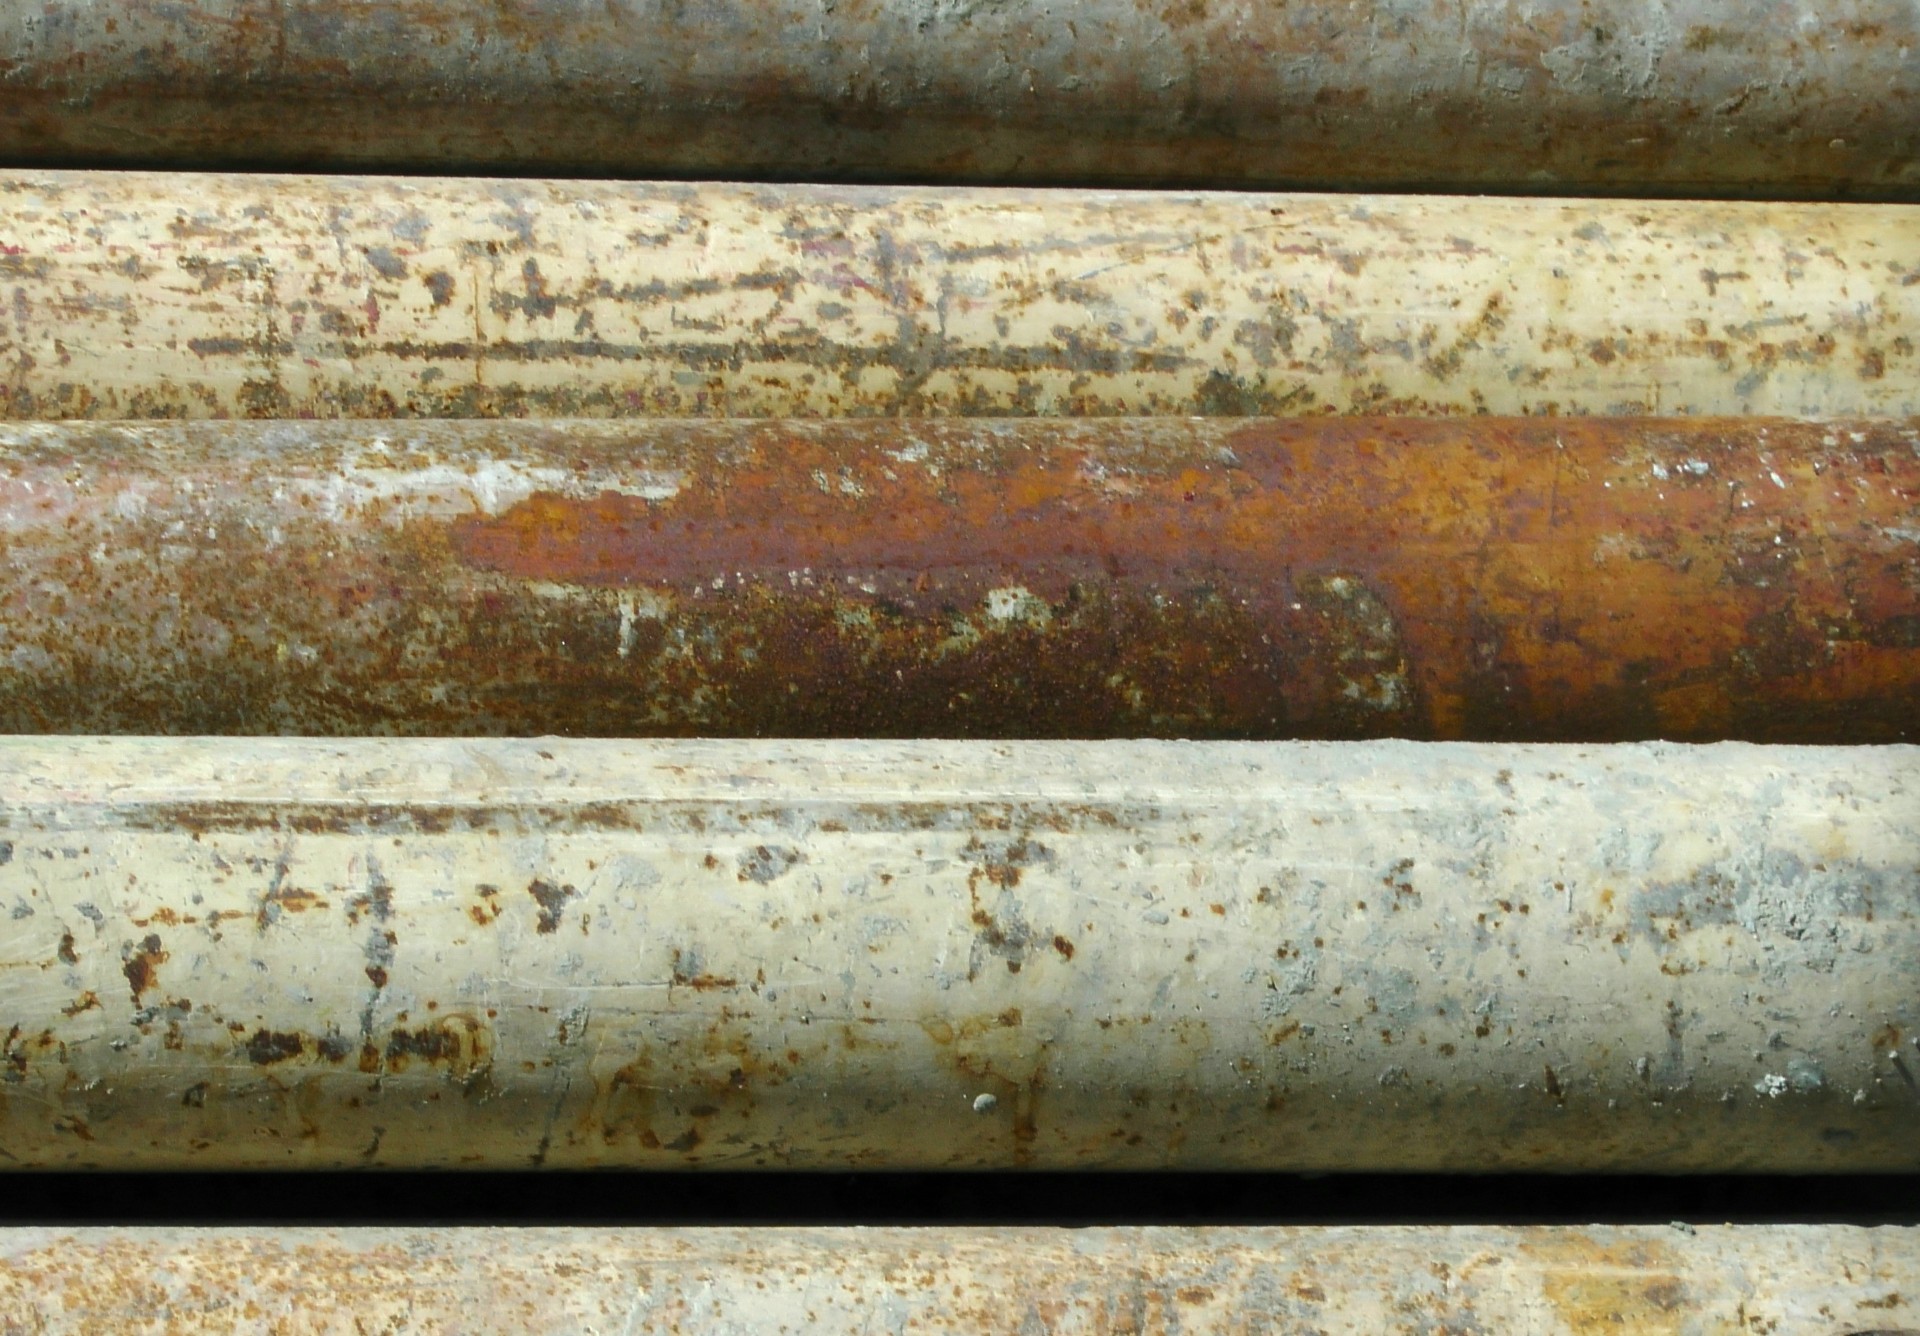 Old Rusted Pipes Background